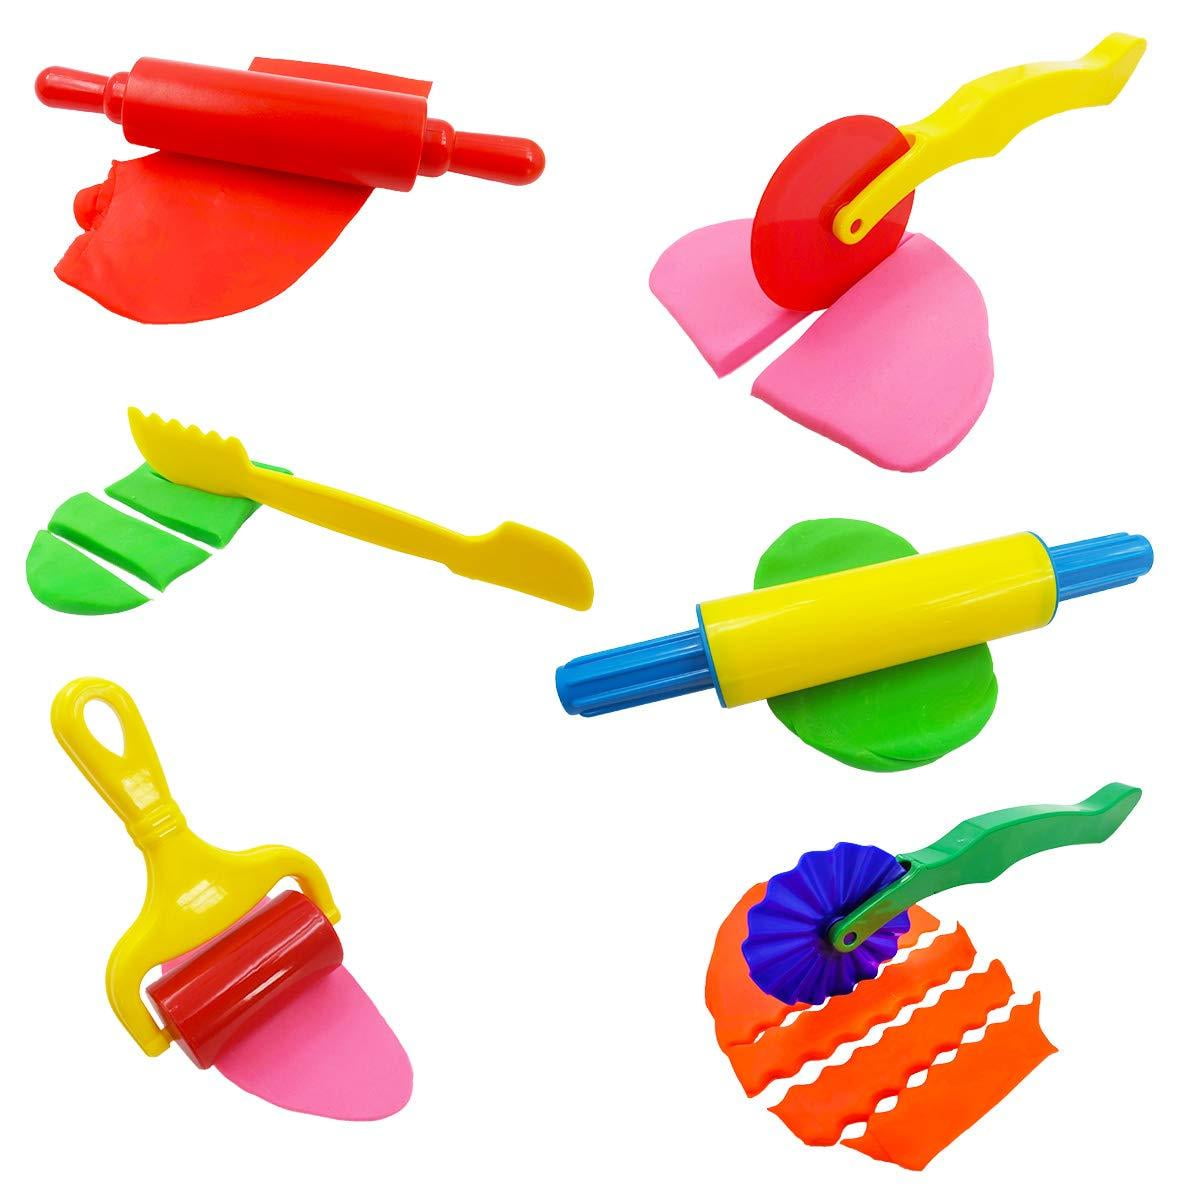 Rolling Pins for Creative Dough Cutting Various Animal Molds 45 PCS Extruders FRIMOONY Plastic Play Dough Tools for Kids 